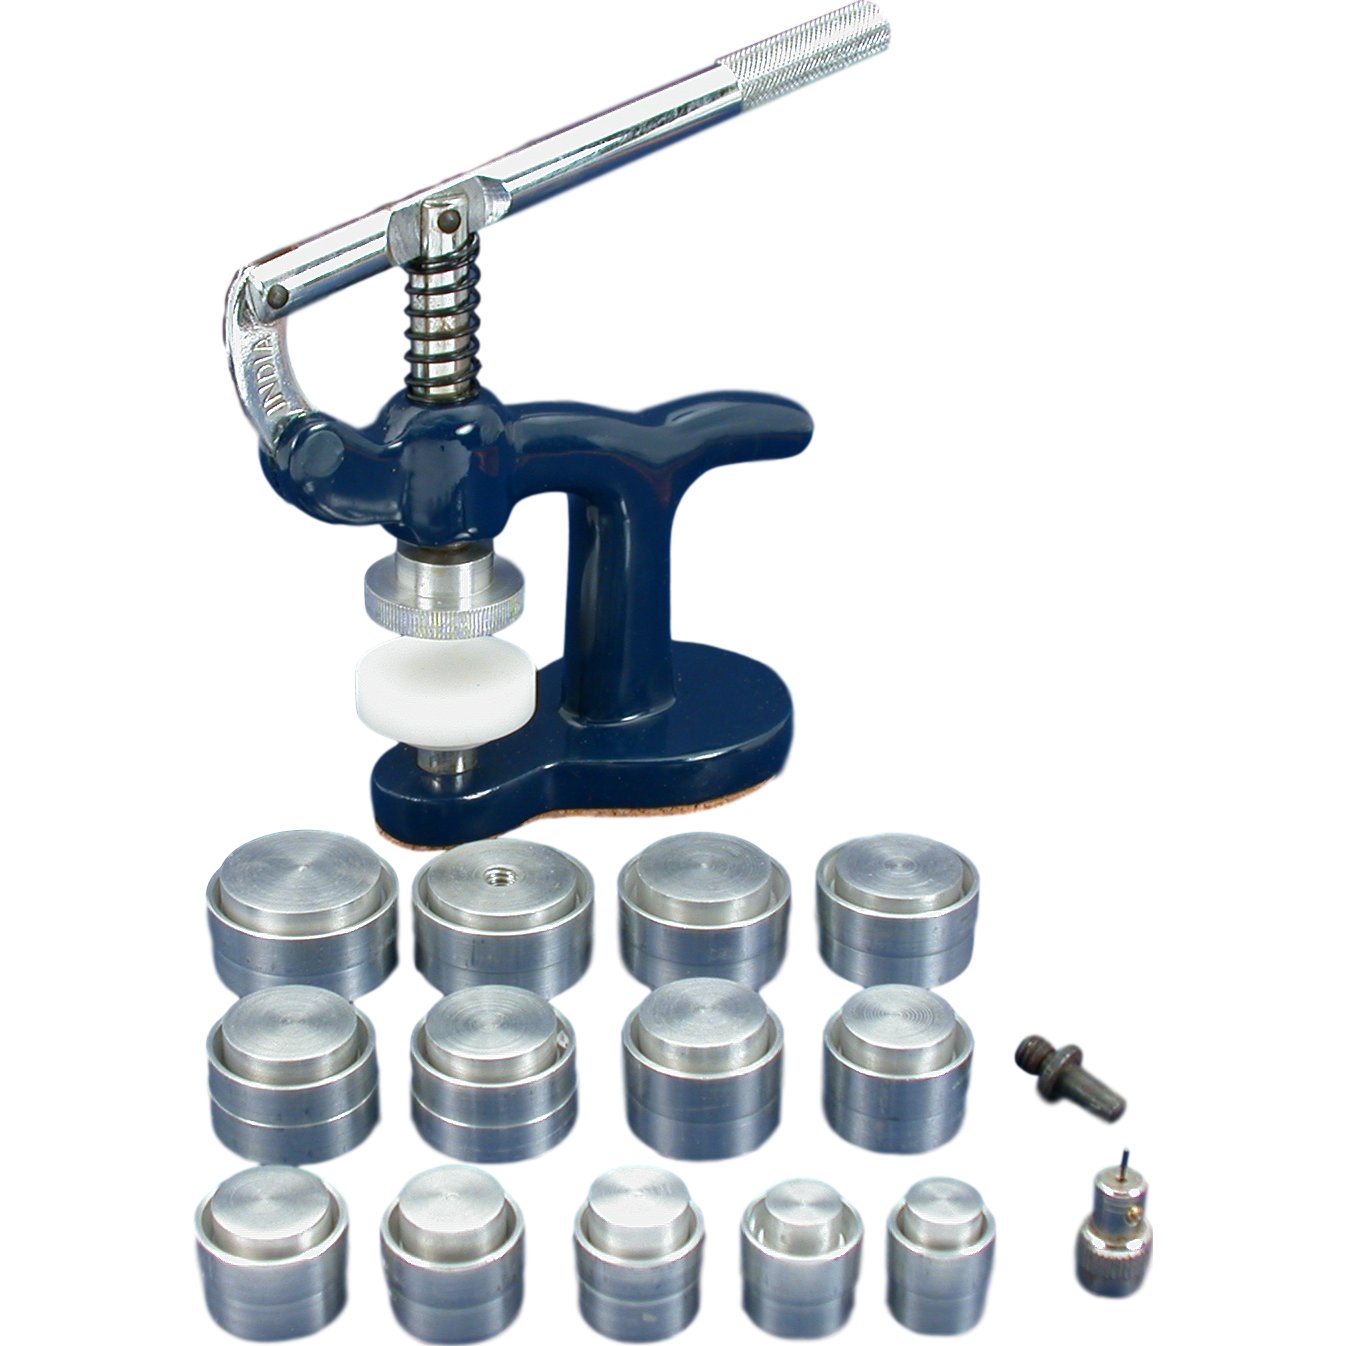 Watch Glass & Case Back Fitting Machine 13 Dies Tool